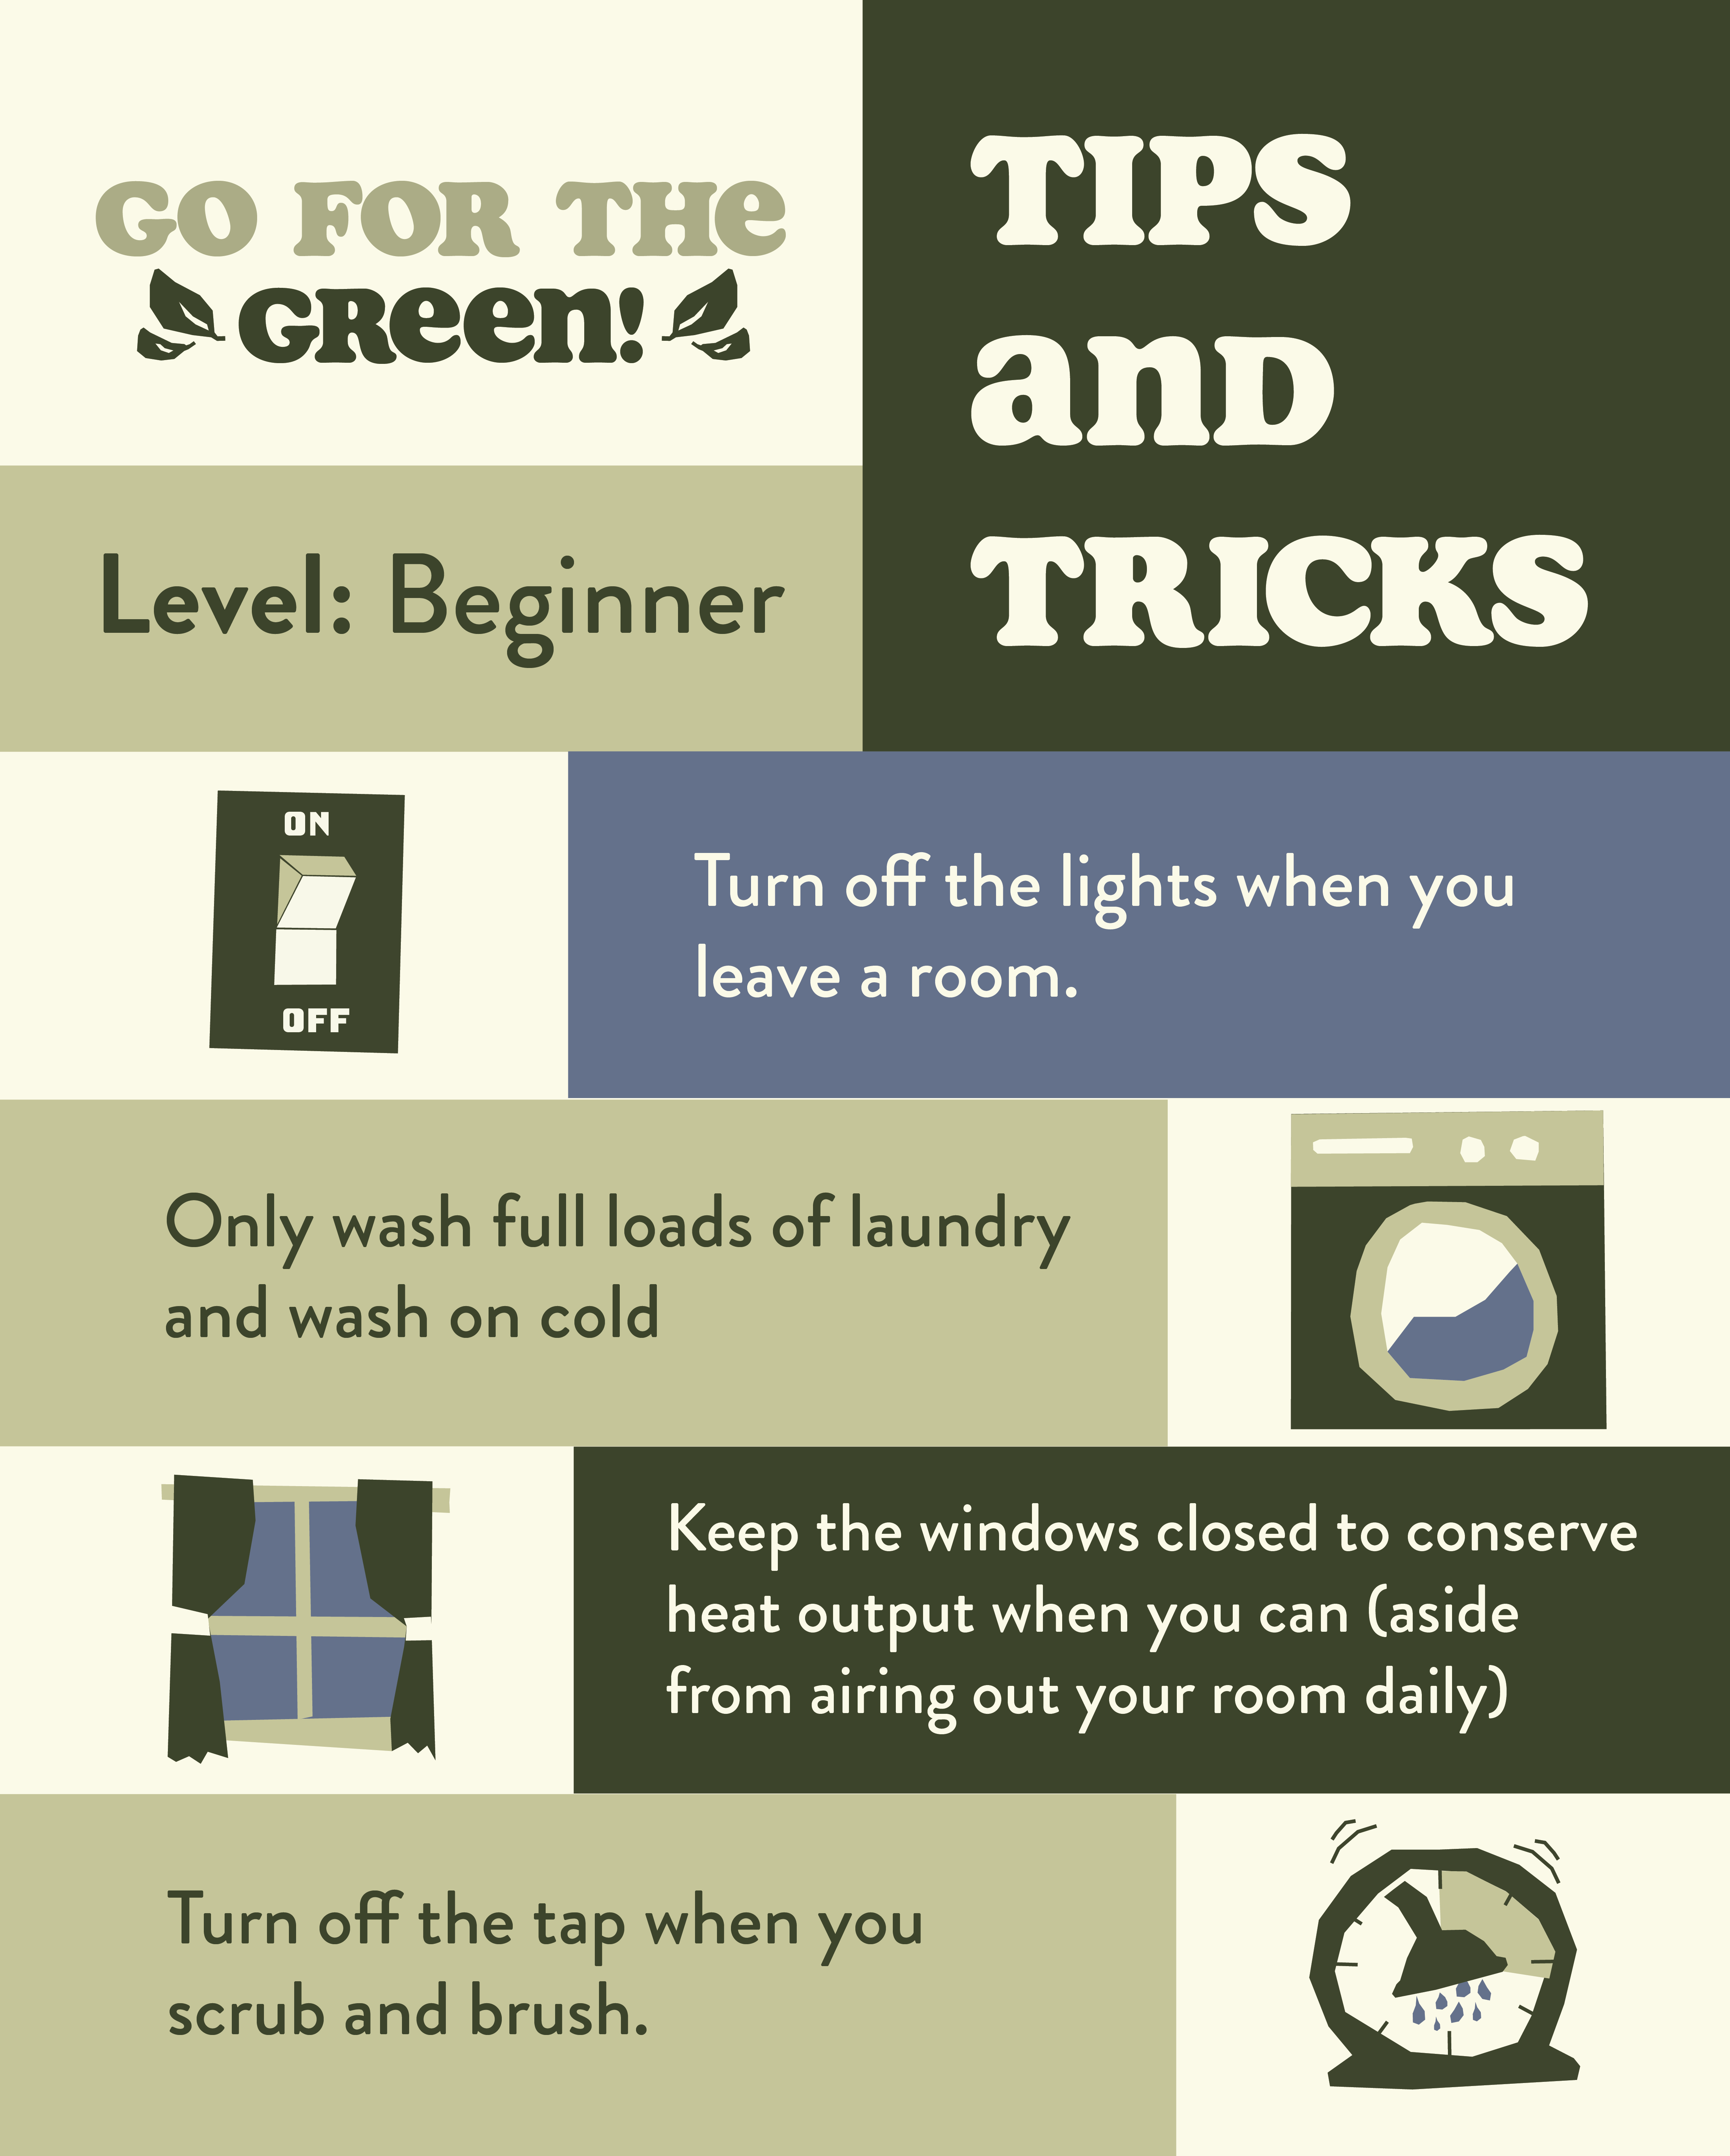 Go for the Green tips and tricks graphic. Includes tips for beginner pledgers such as; turning off the lights when you leave the room, only wash full loads of laundry on cold, keep windows closed to conserve energy (aside form airing out your room daily), and turn off the tap when you scrub and brush.